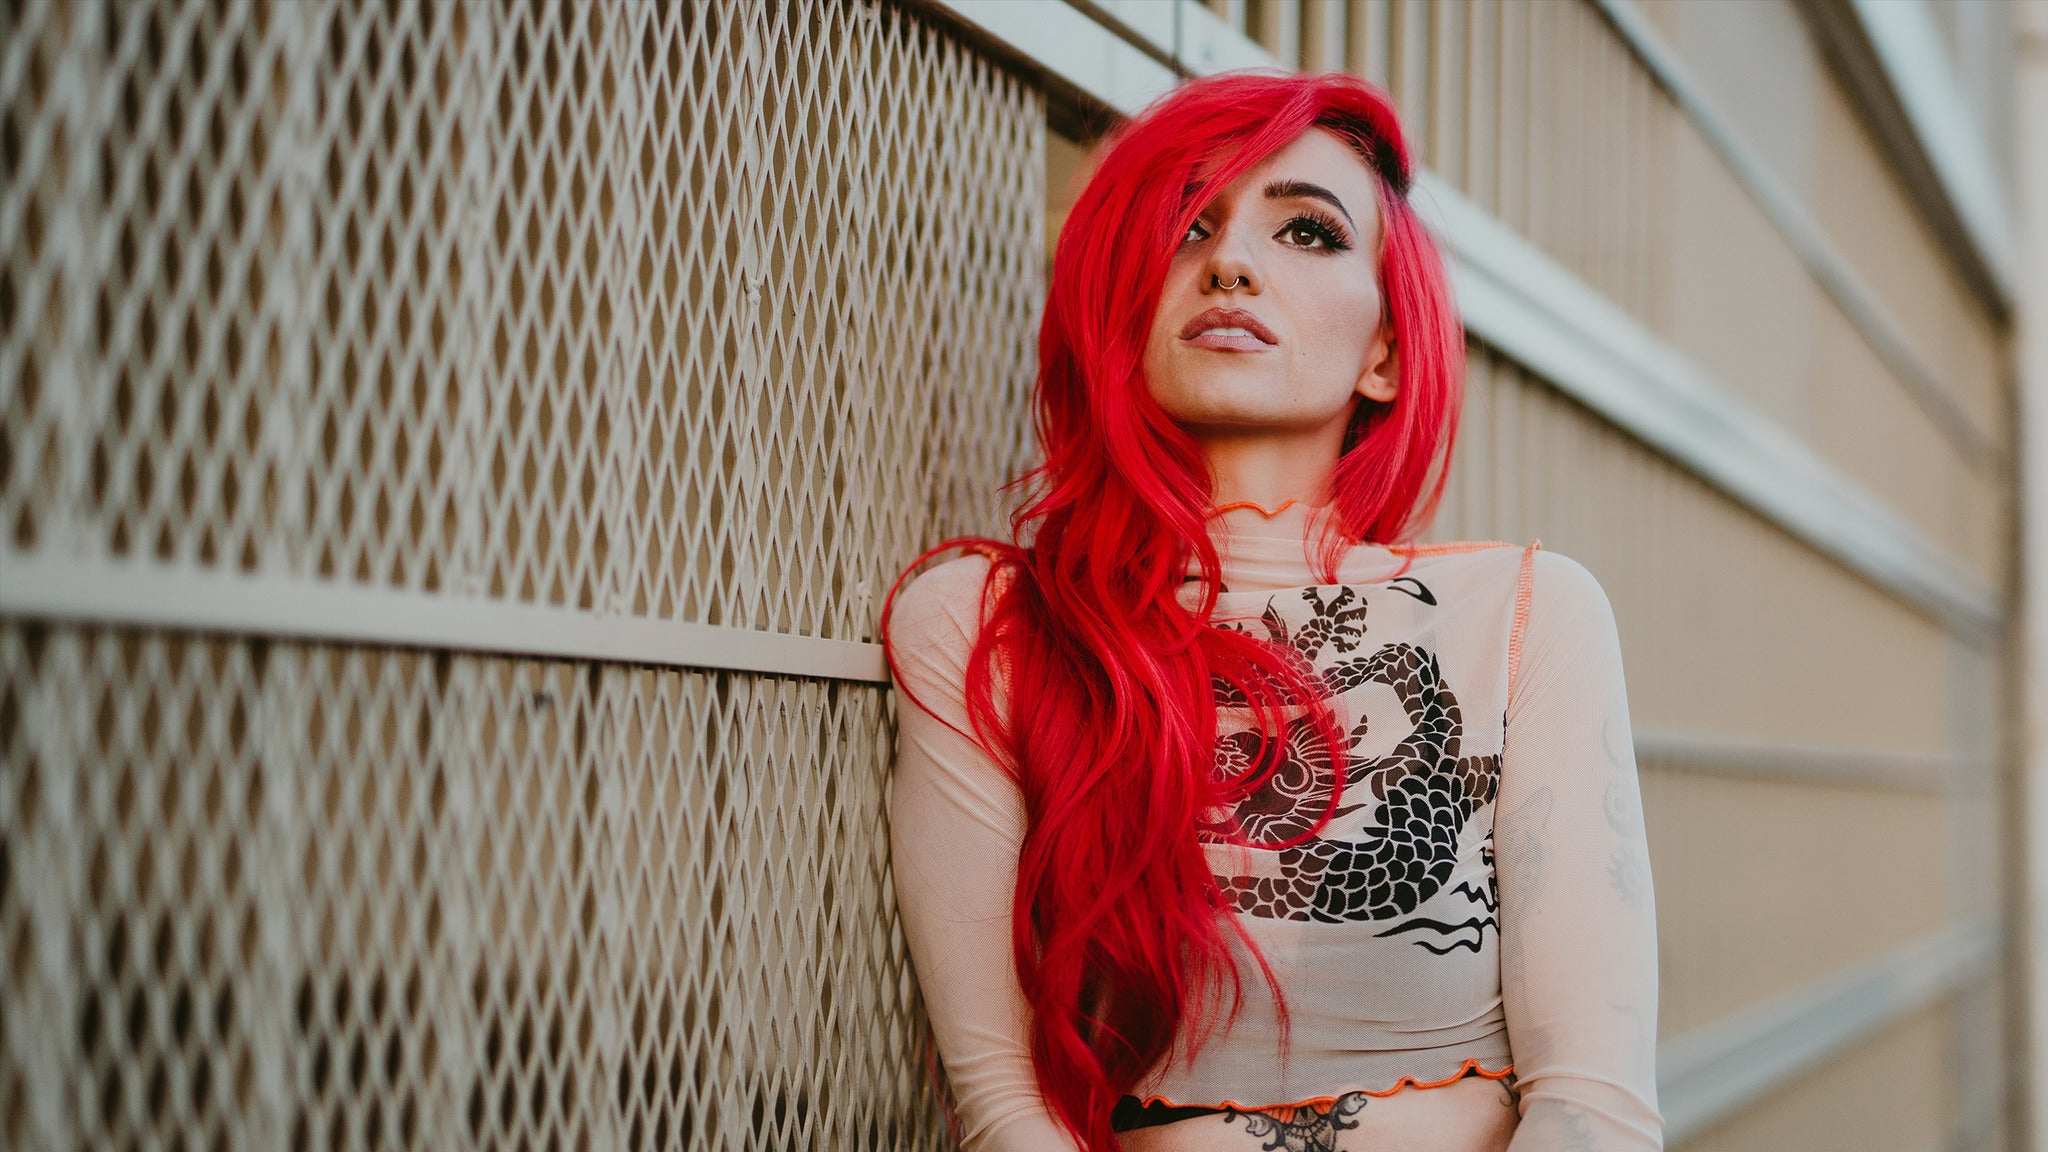 Lights - We Were Here Tour in Chicago promo photo for Citi® Cardmember Preferred presale offer code